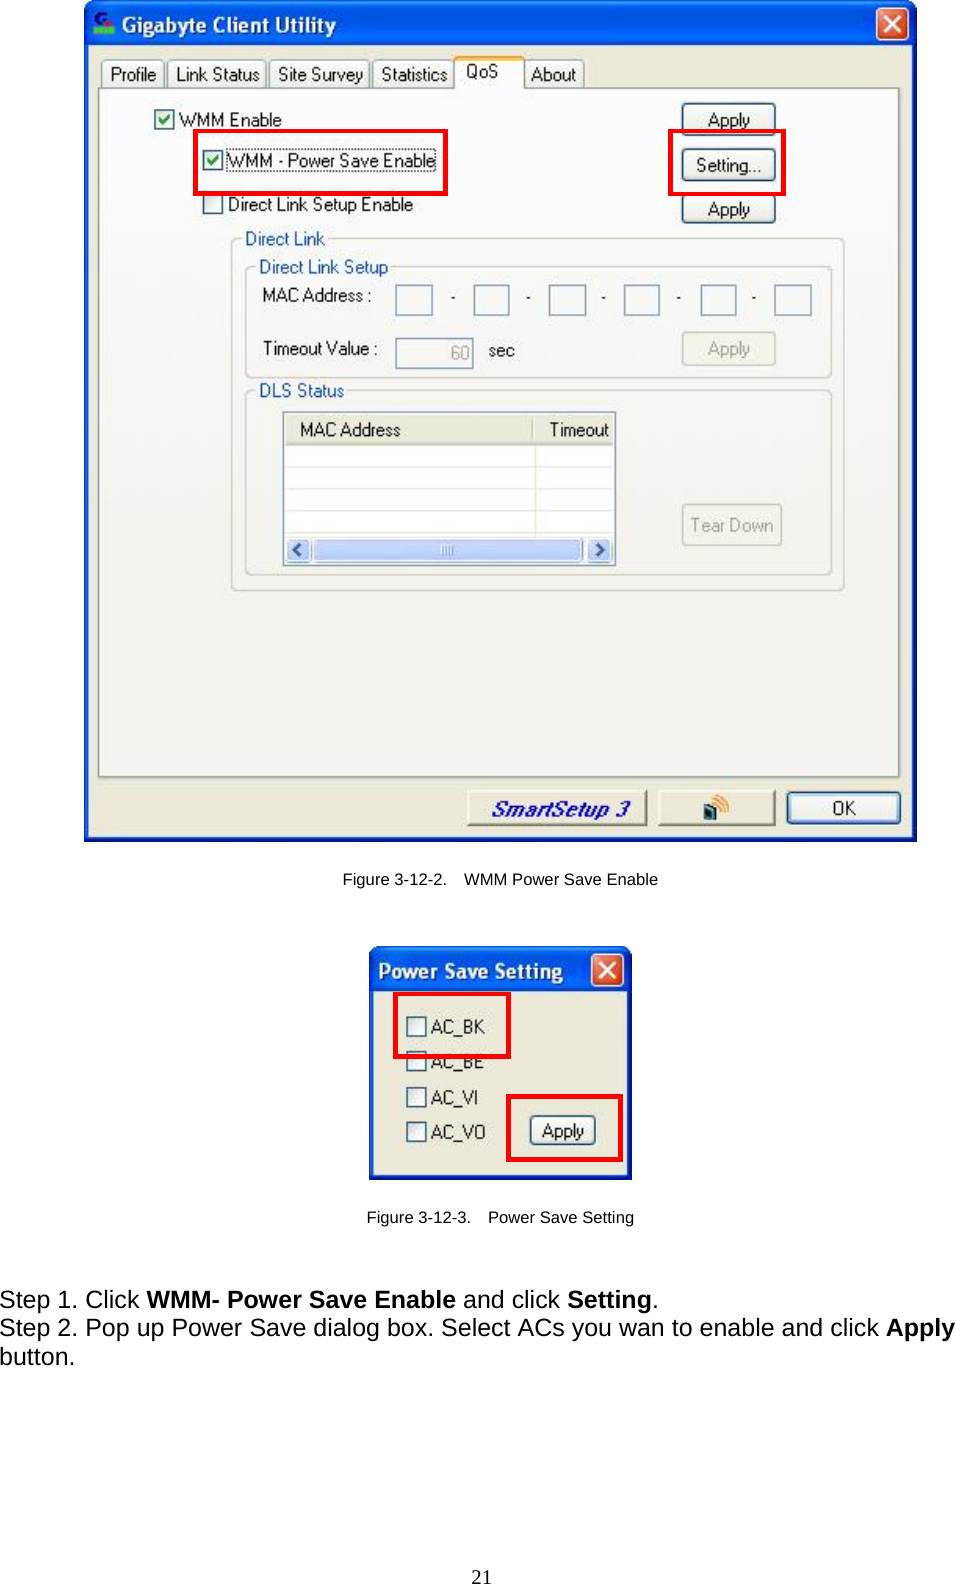   Figure 3-12-2.    WMM Power Save Enable     Figure 3-12-3.    Power Save Setting   Step 1. Click WMM- Power Save Enable and click Setting.  Step 2. Pop up Power Save dialog box. Select ACs you wan to enable and click Apply button.  21   